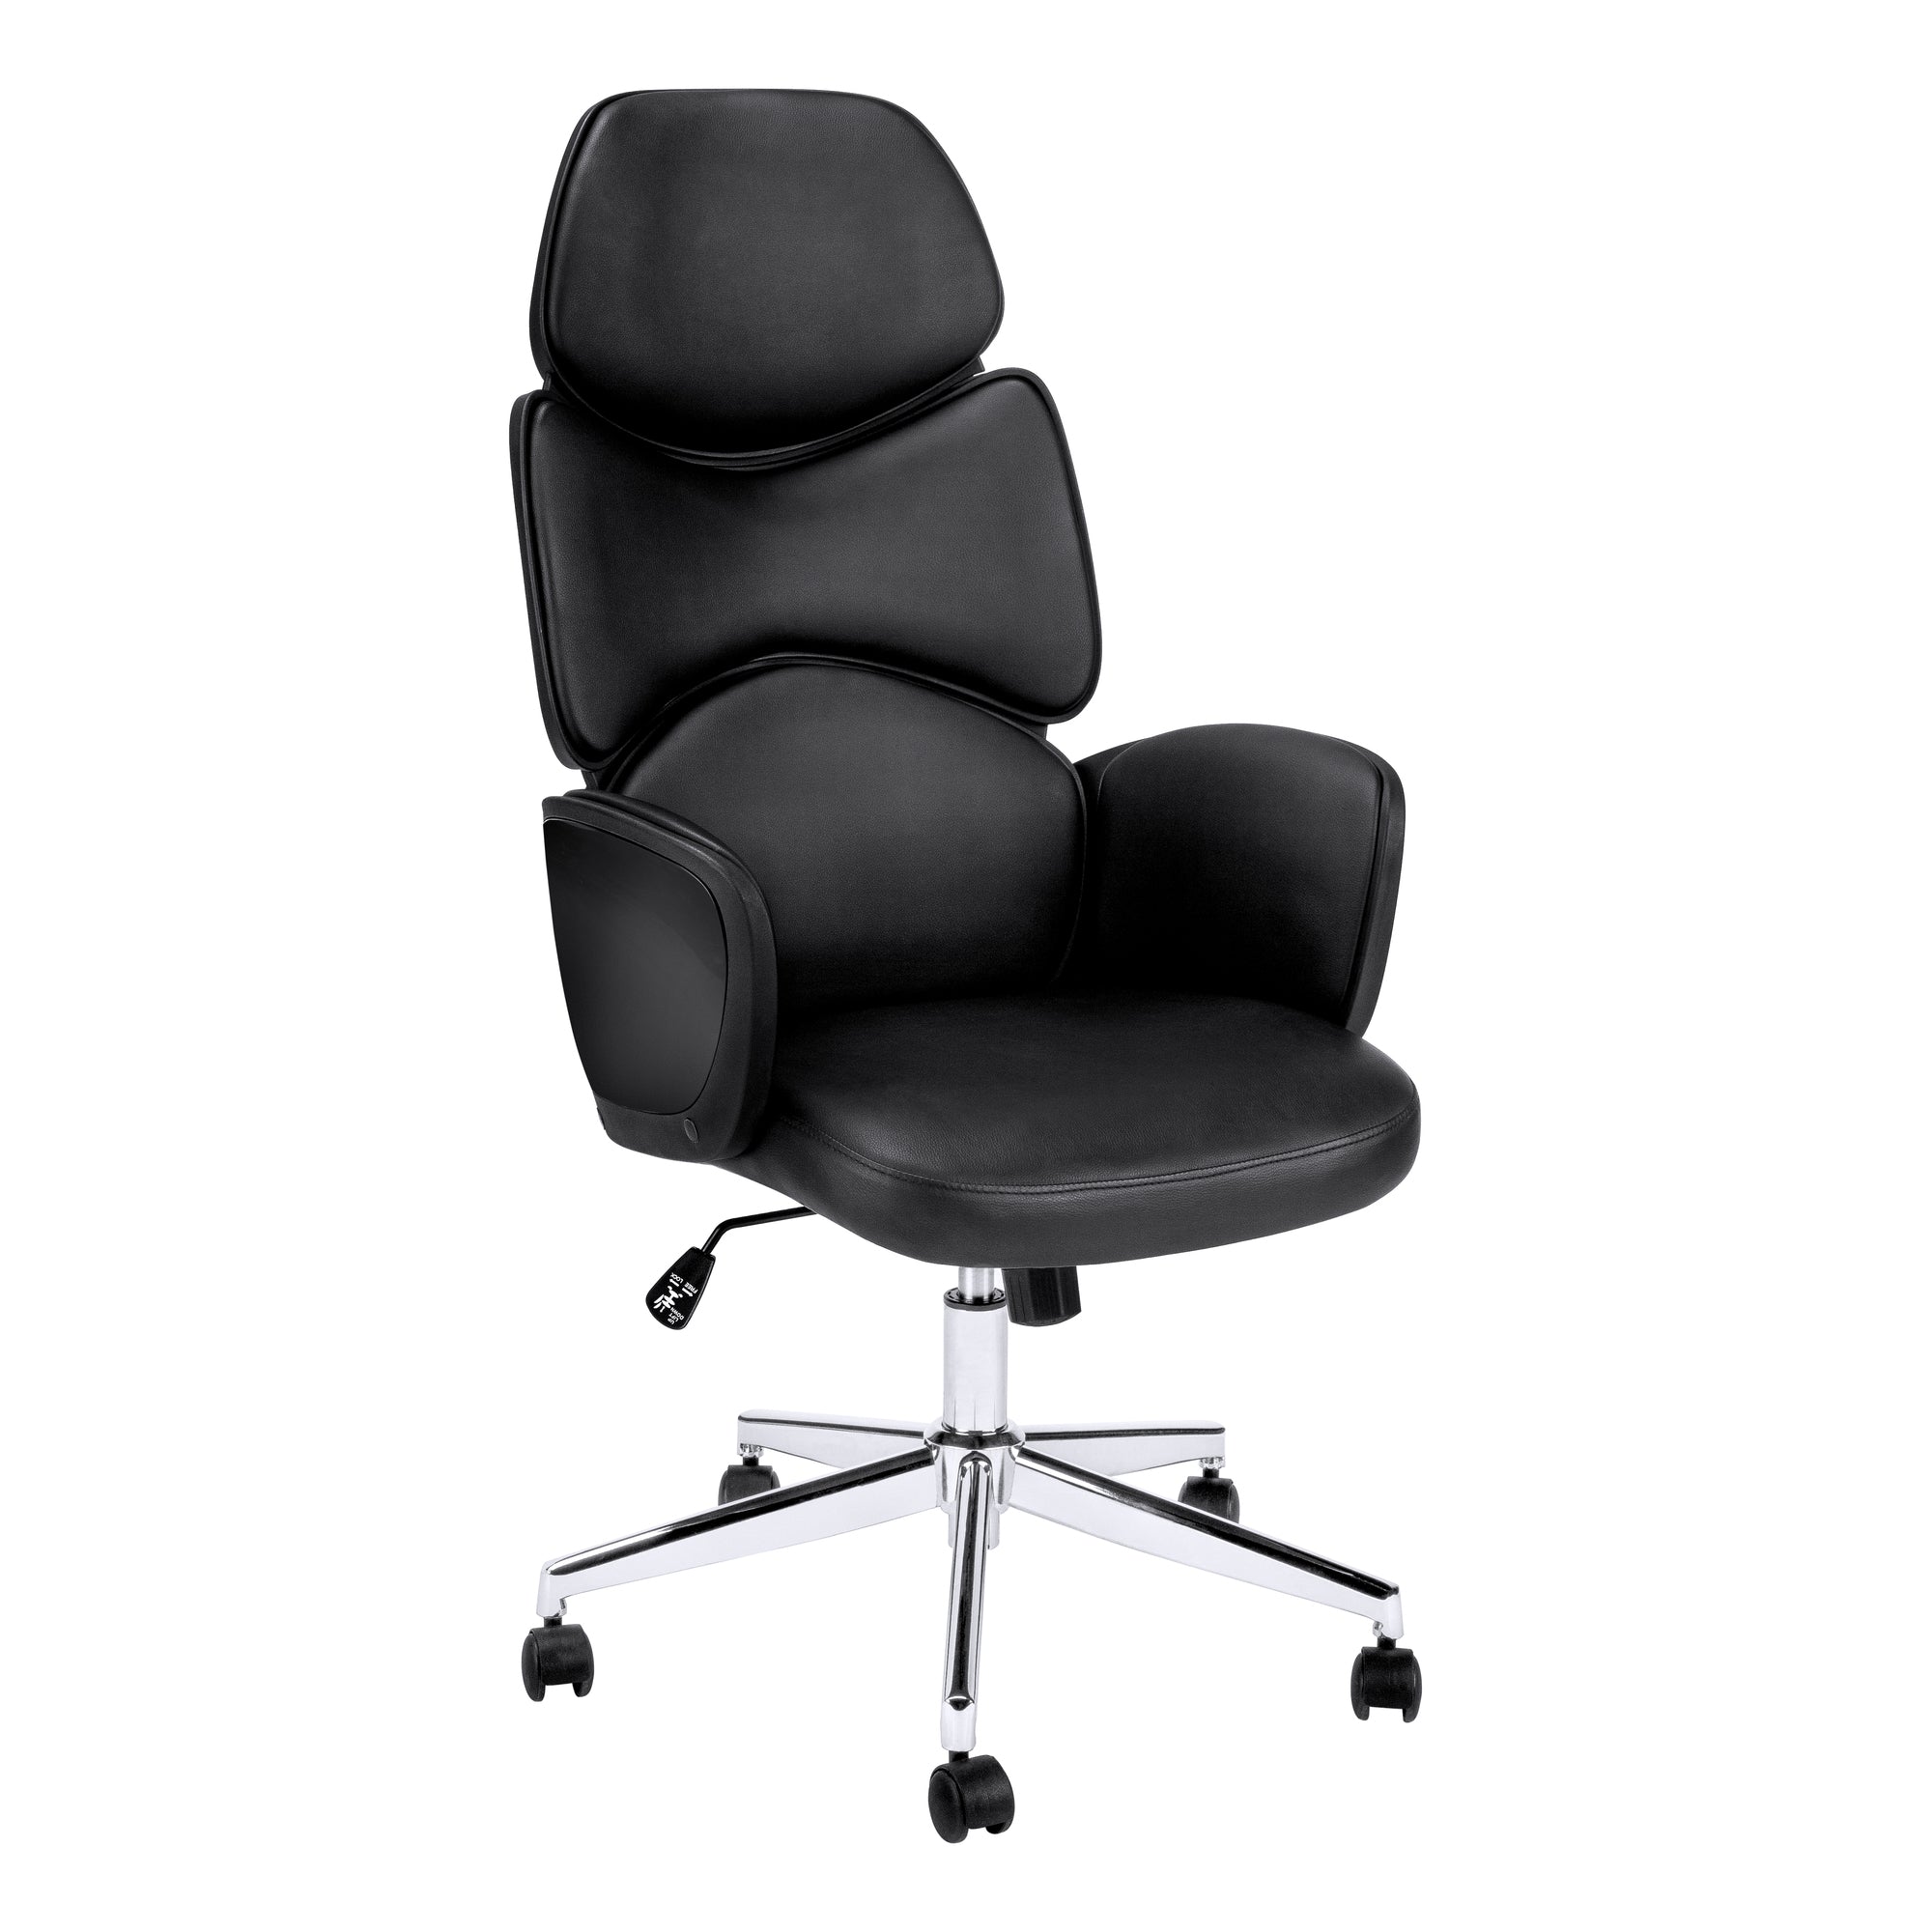 Office Chair - Black Leather-Look / High Back Executive